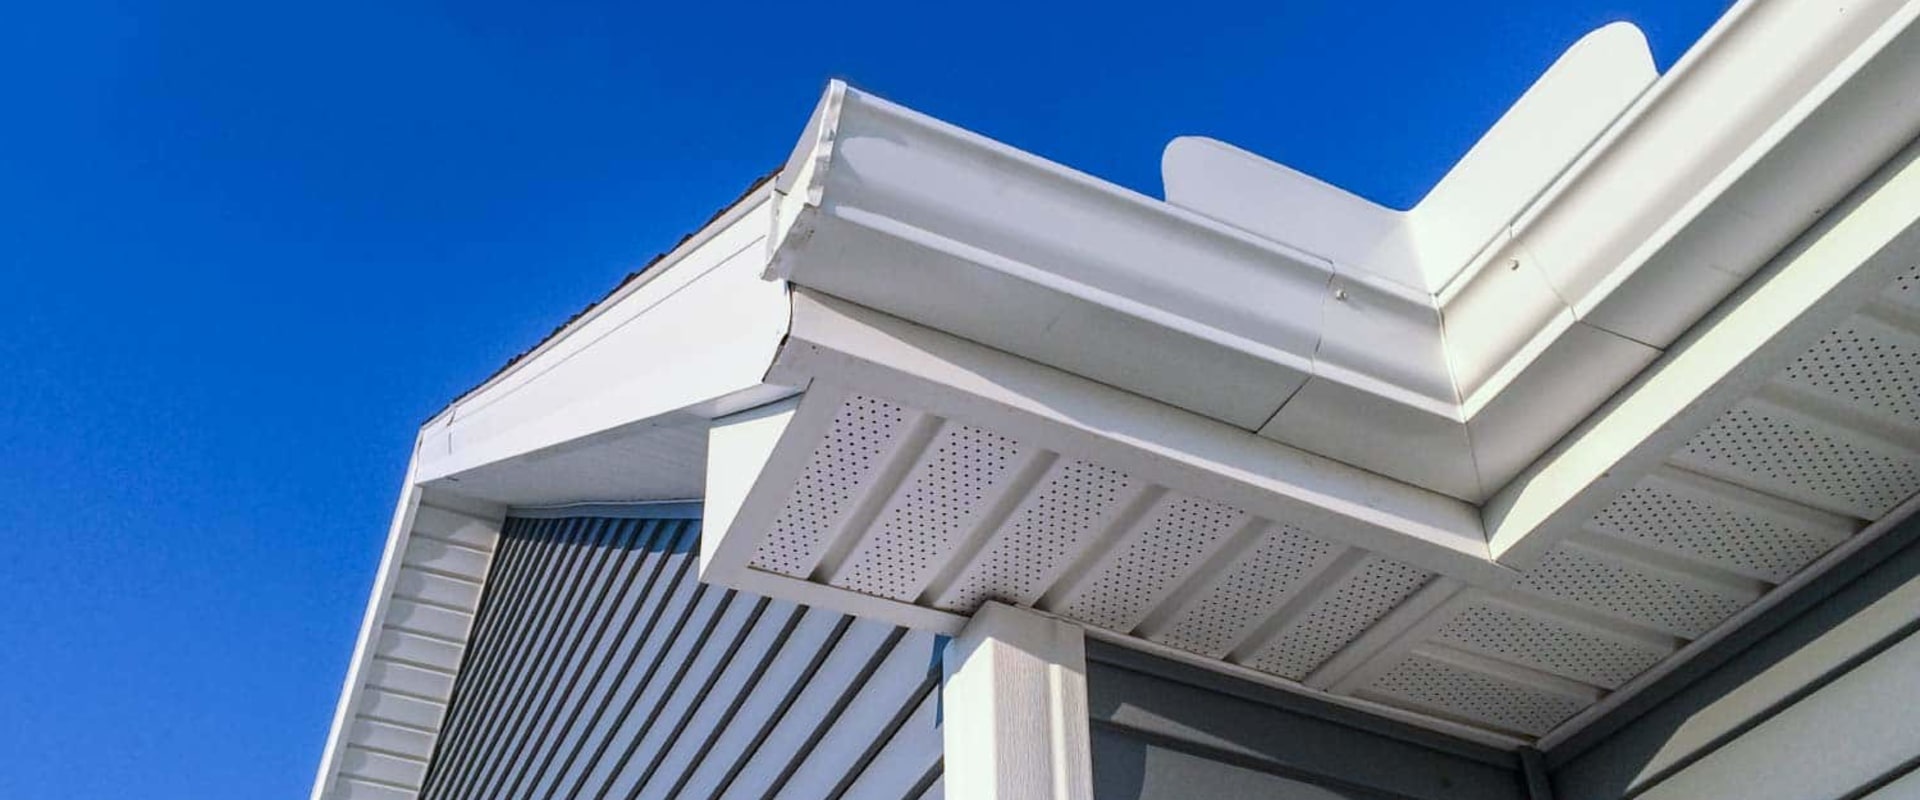 What is the best material for gutters on a house?